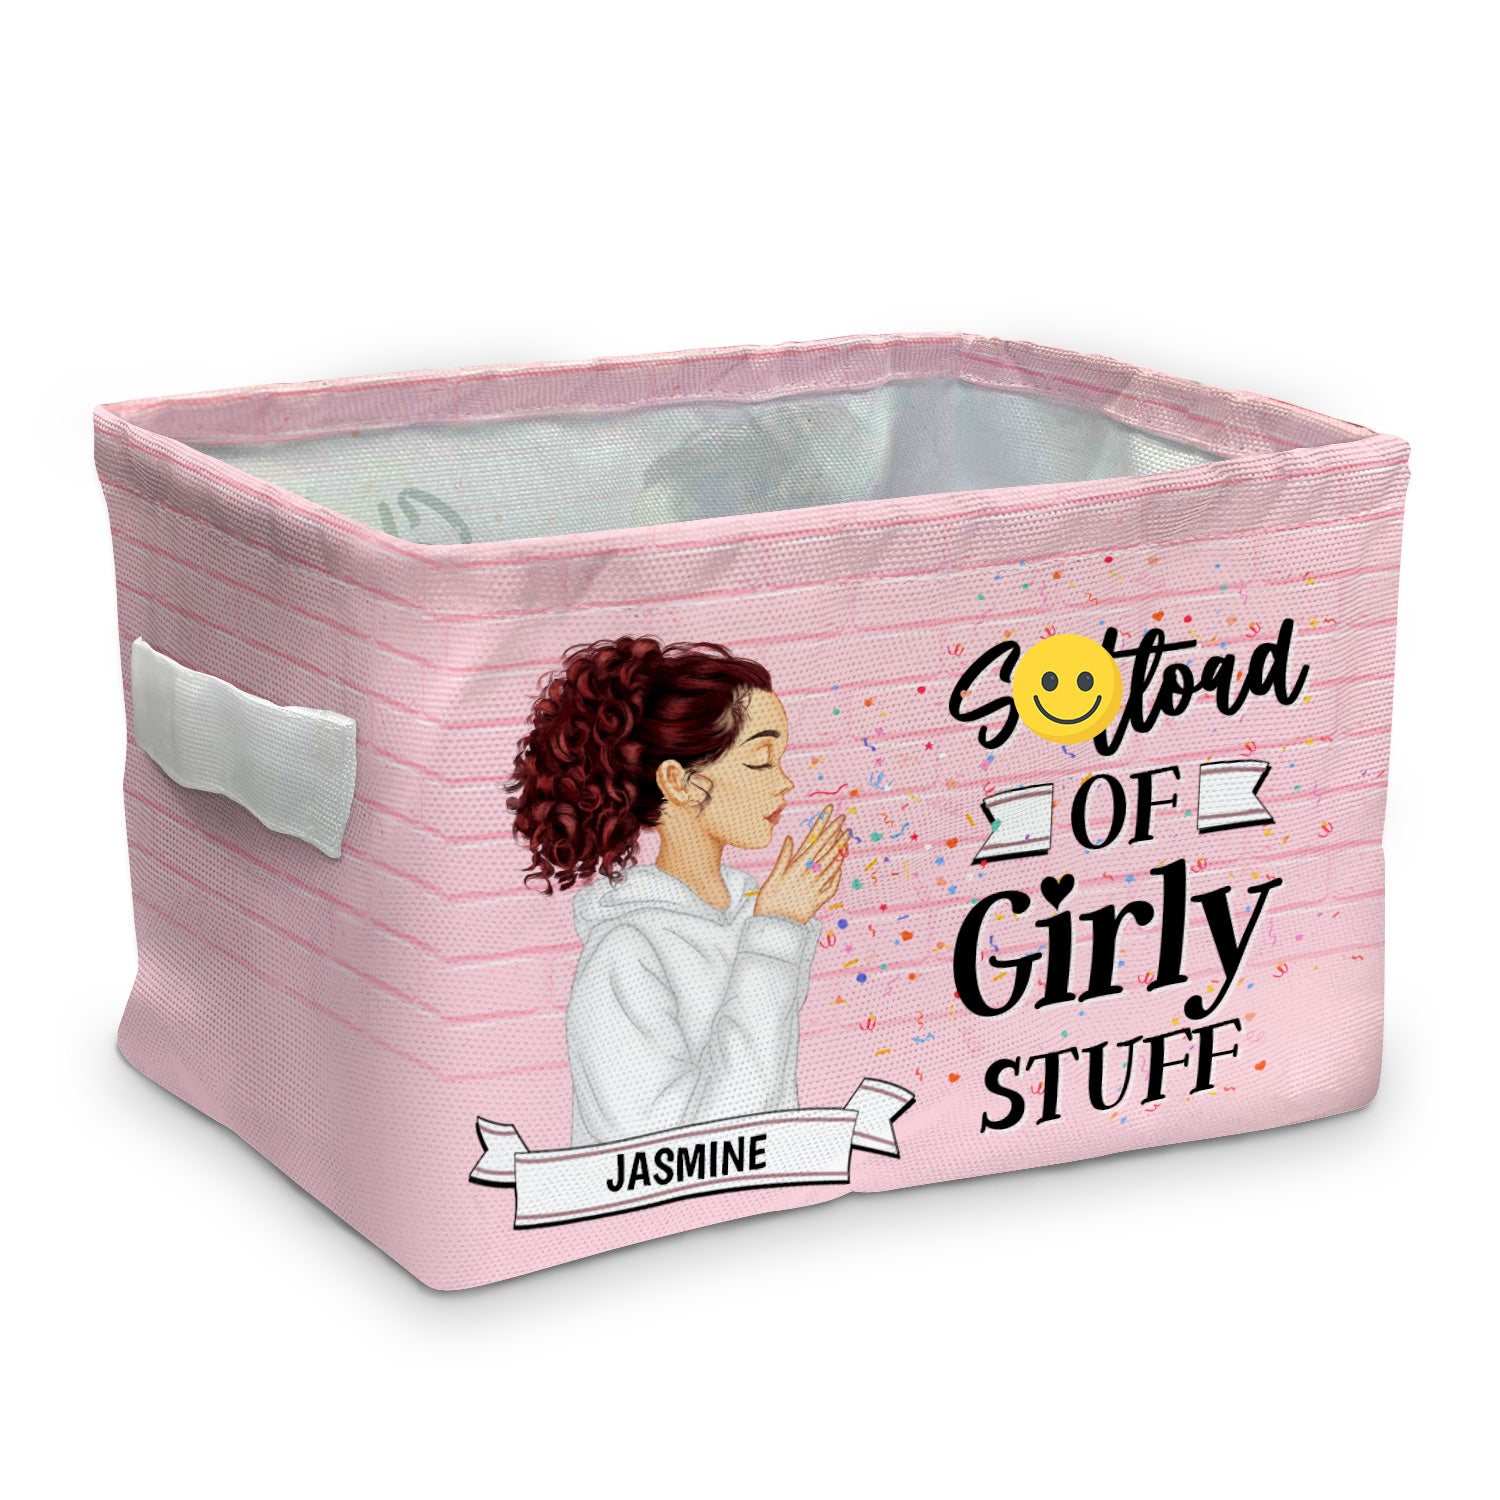 Girly Stuff - Gift For Yourself, Gift For Women - Personalized Storage Box